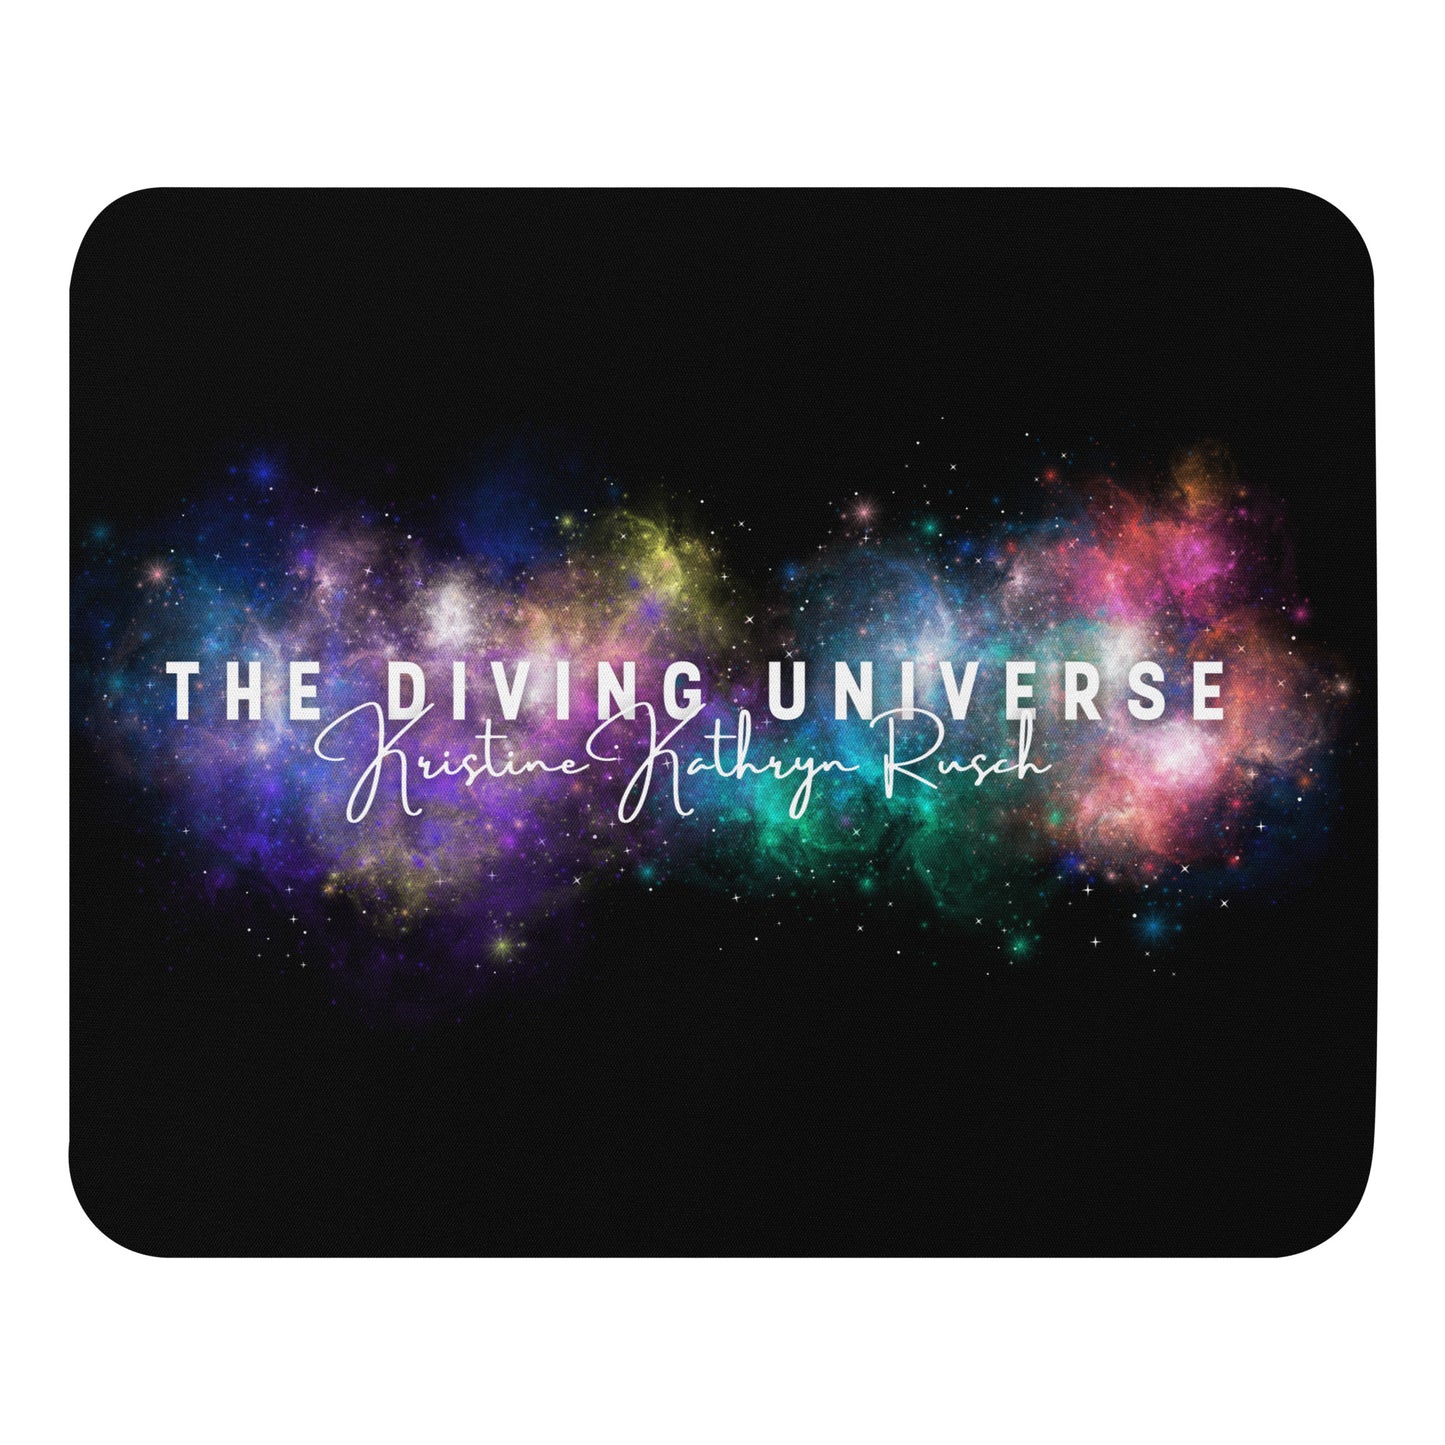 DIVING UNIVERSE NEBULA Mouse Pad - The Diving Universe by Kristine Kathryn Rusch